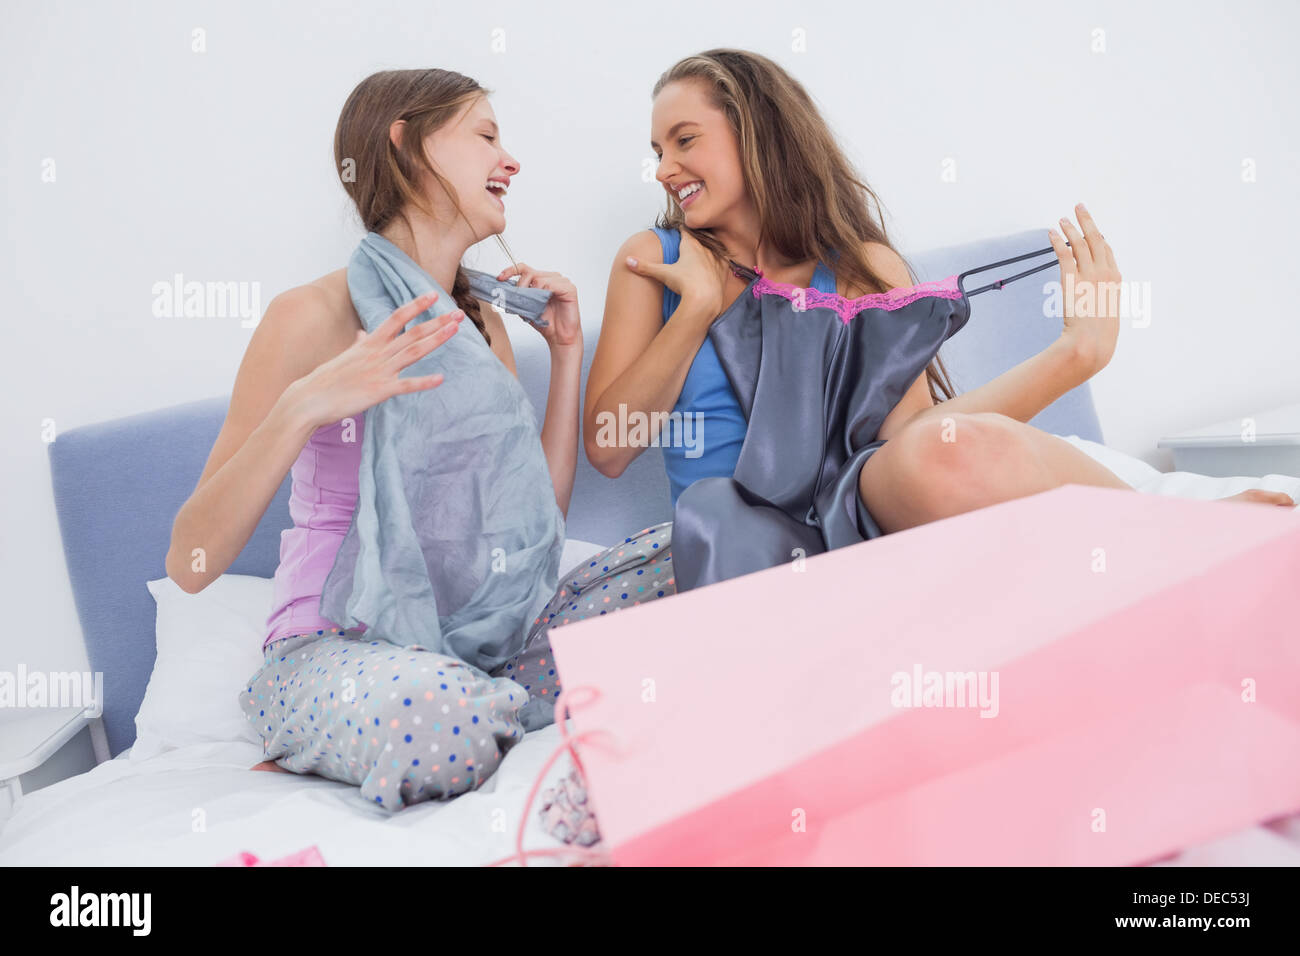 Teen girls sitting on bed after shopping Banque D'Images